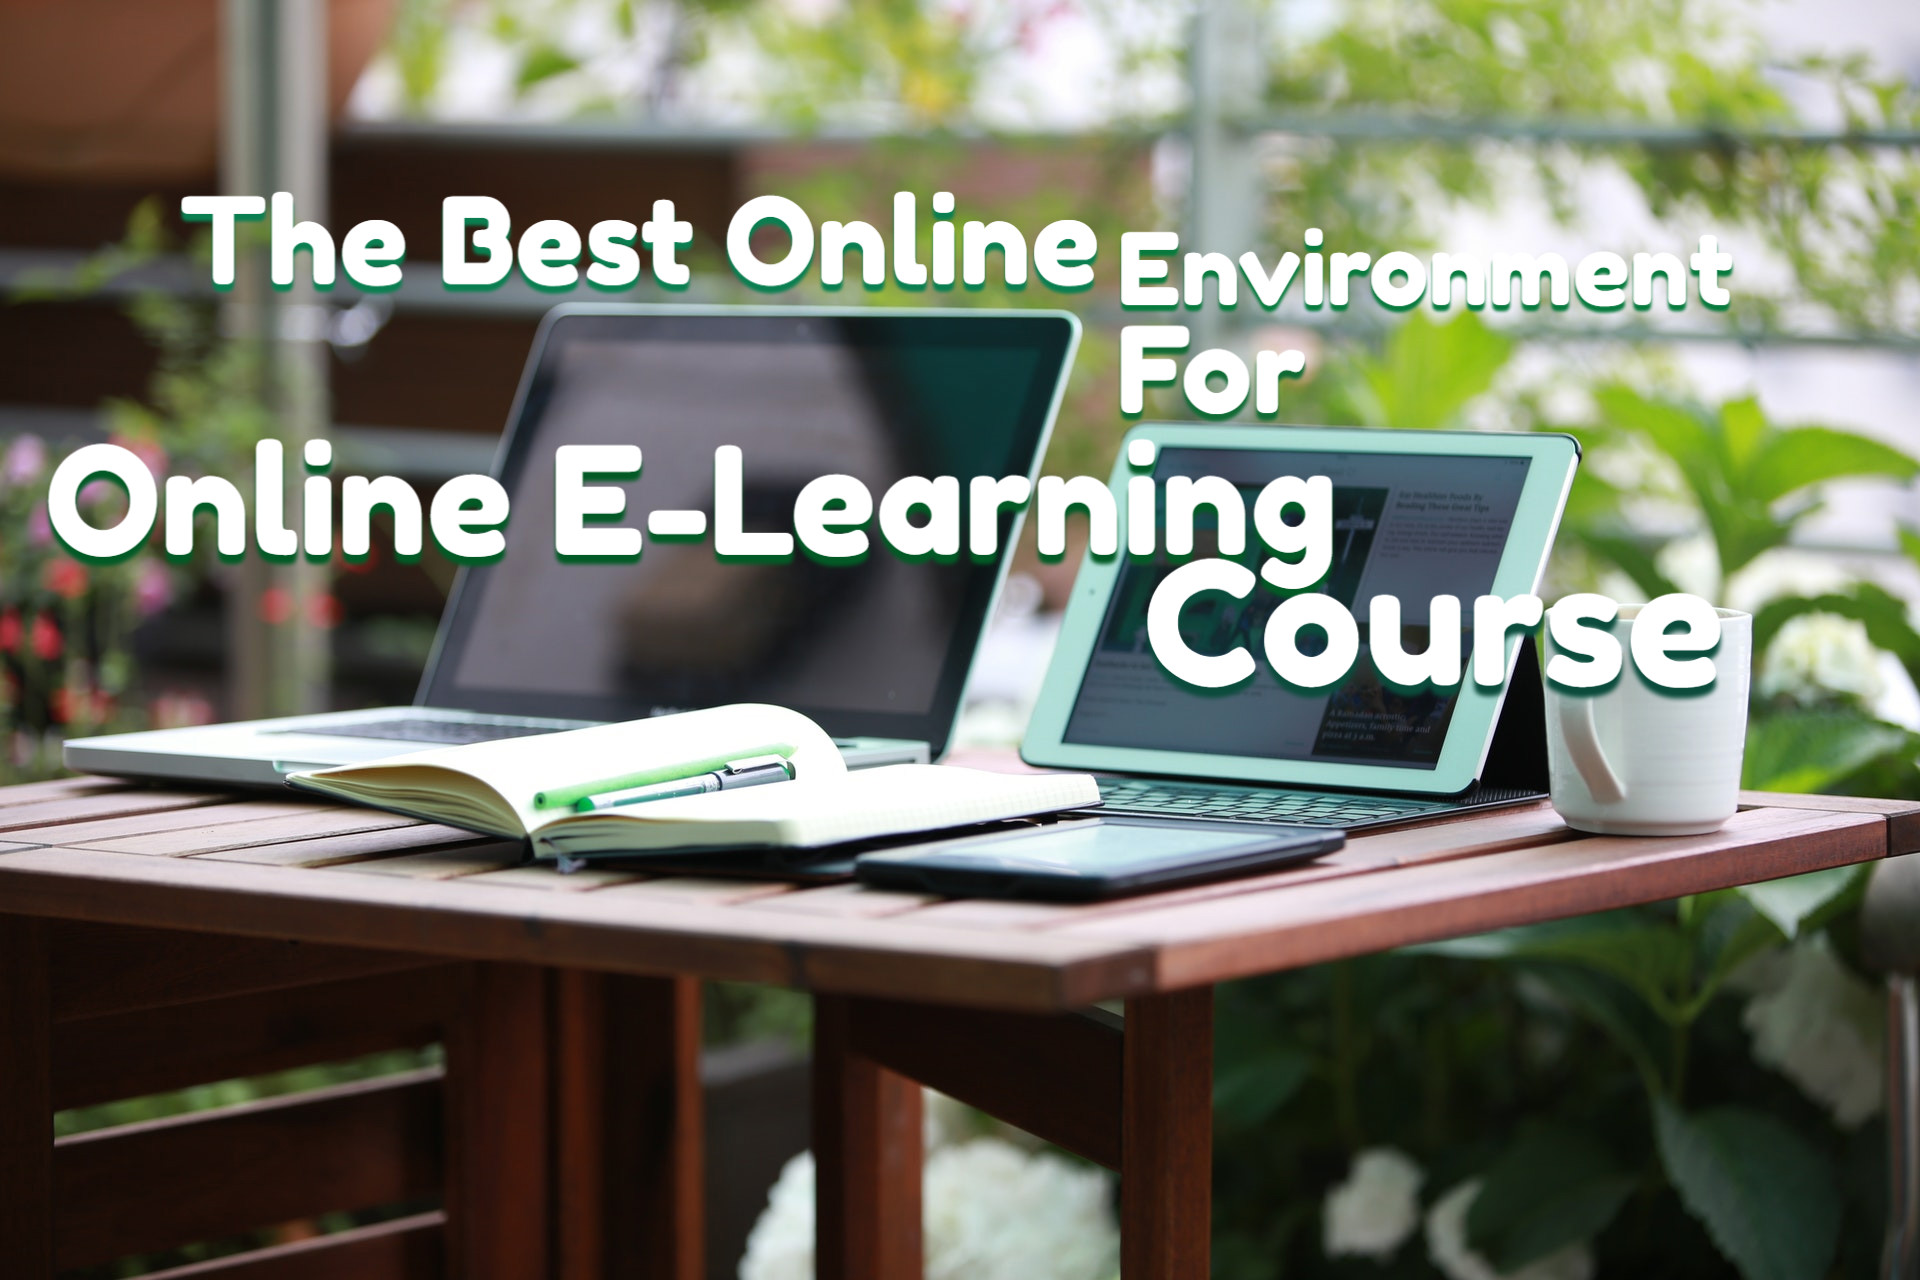 e learning courses online,